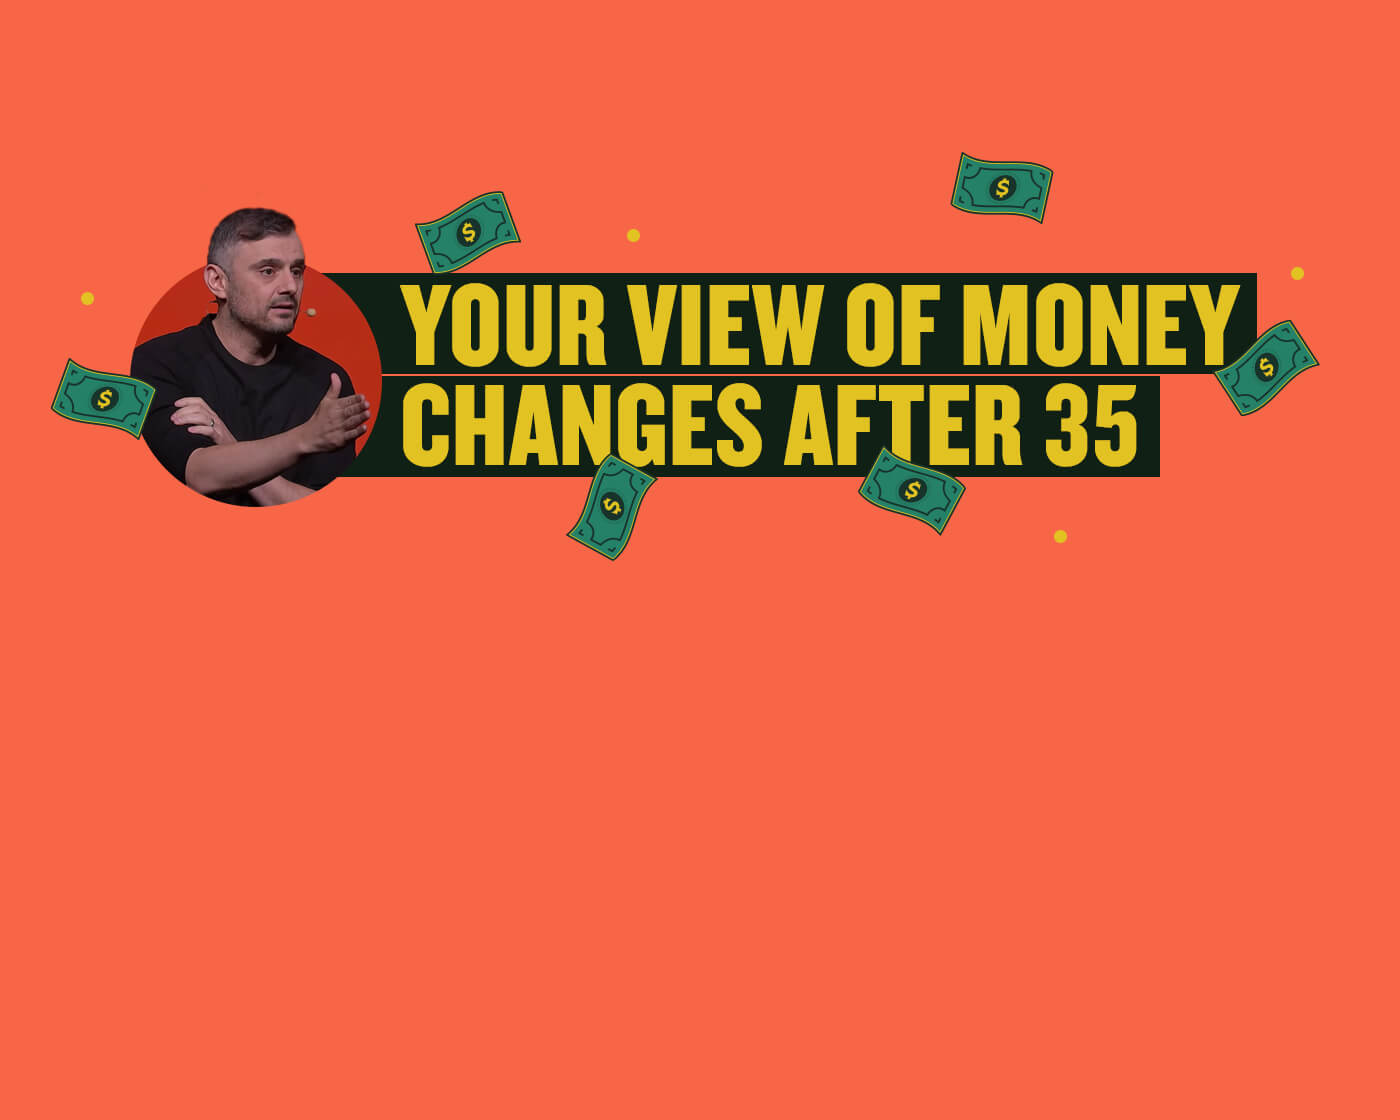 Your View of Money Changes After 35